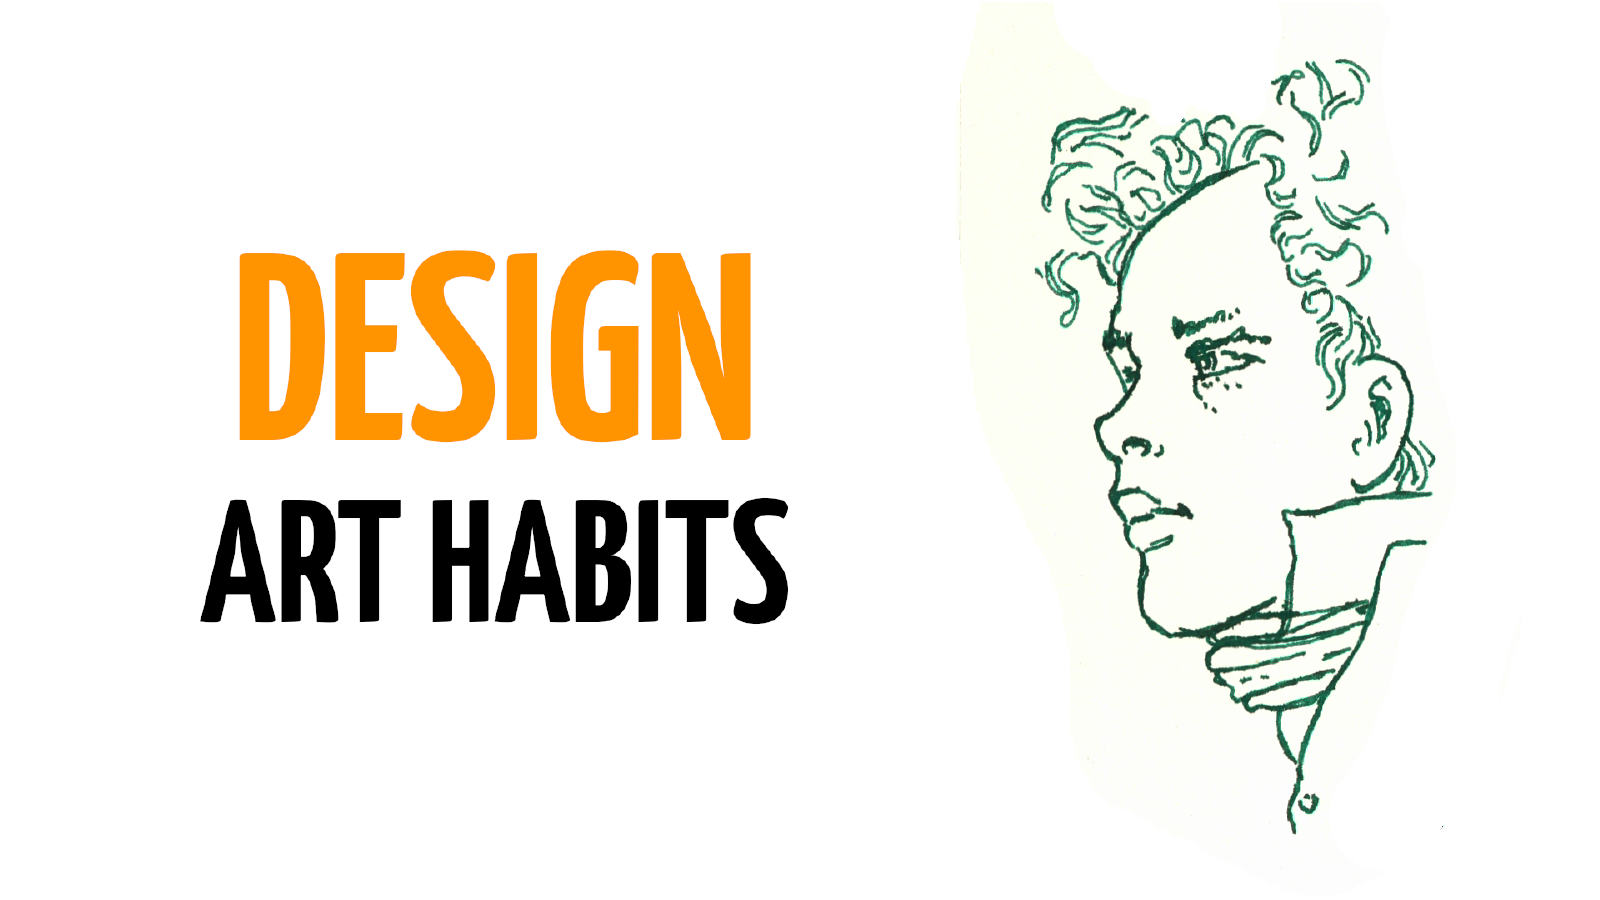 Art Habits, How And Why To Design Them